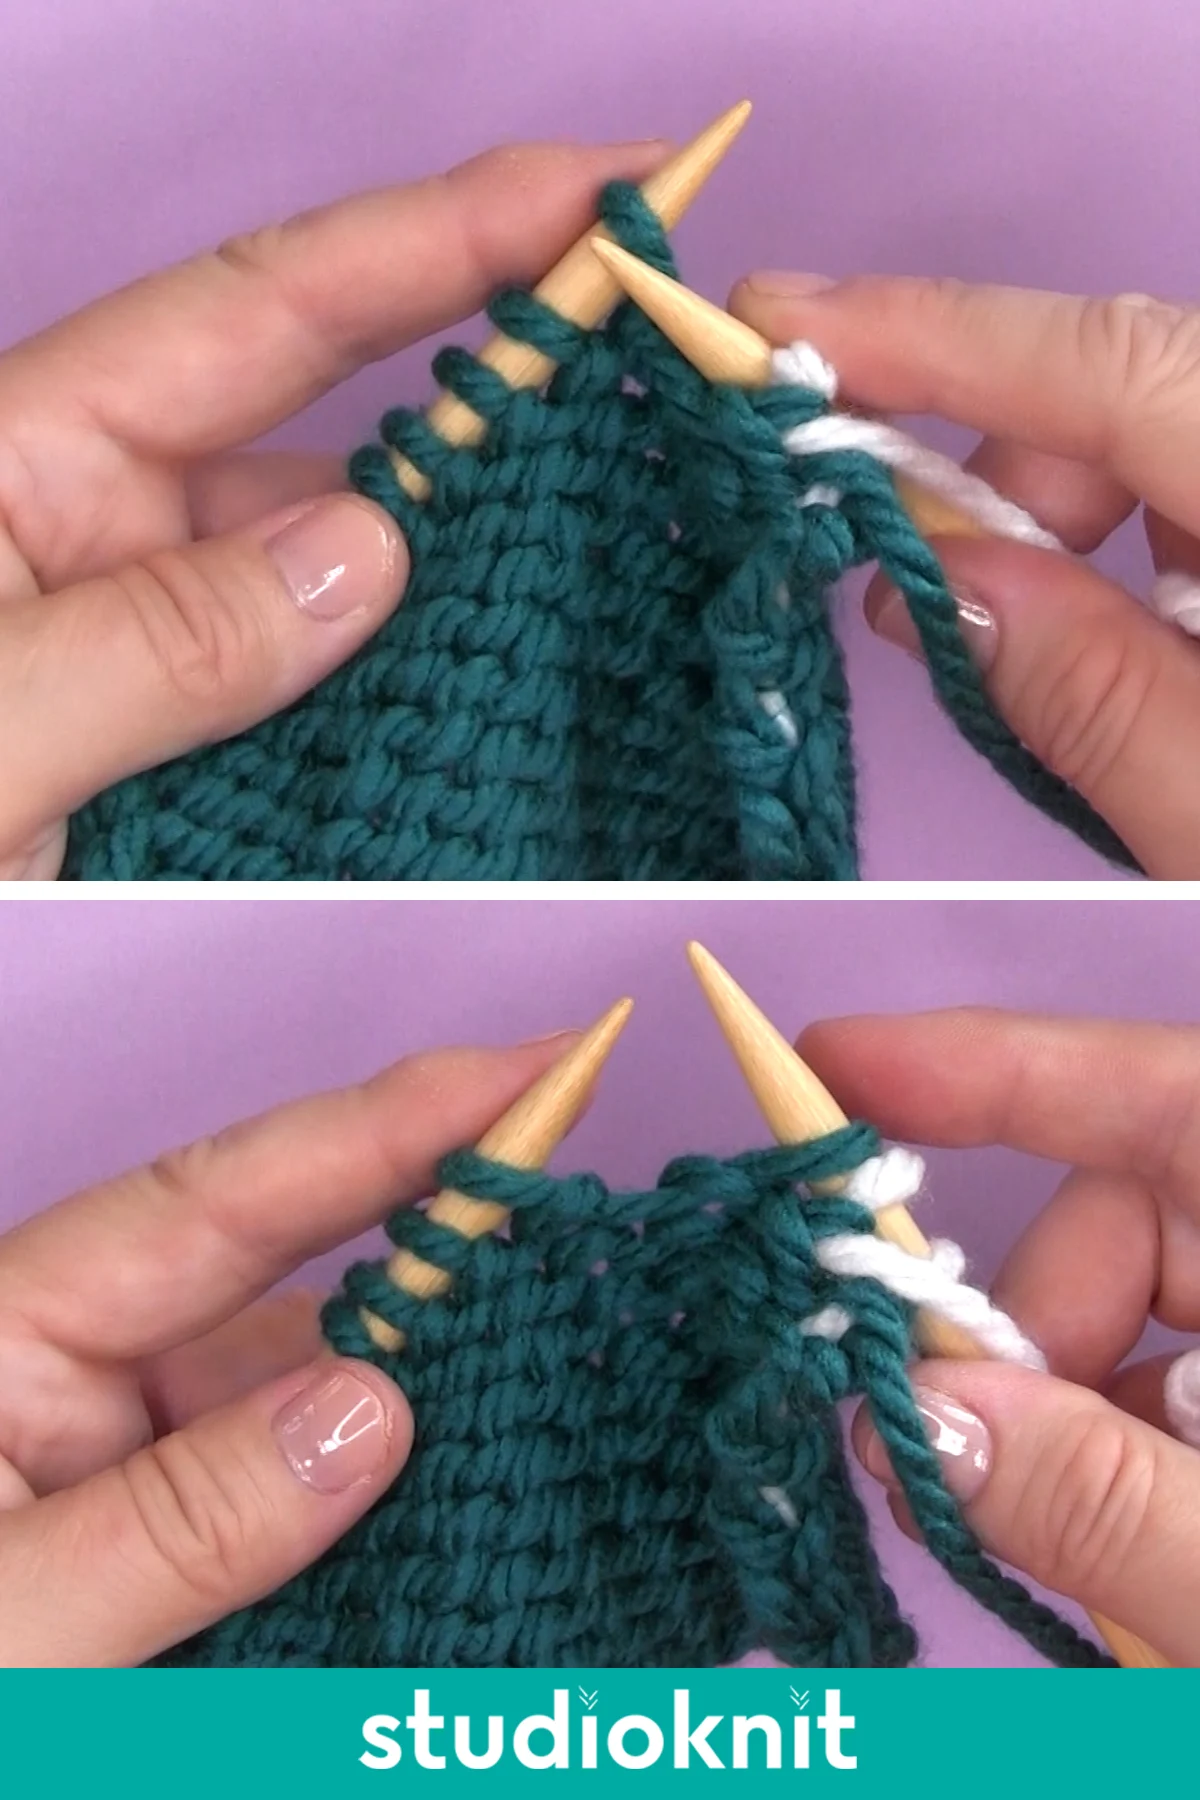 Demonstration of a Slip Stitch Knitwise on a Purl Row with Yarn in Front.